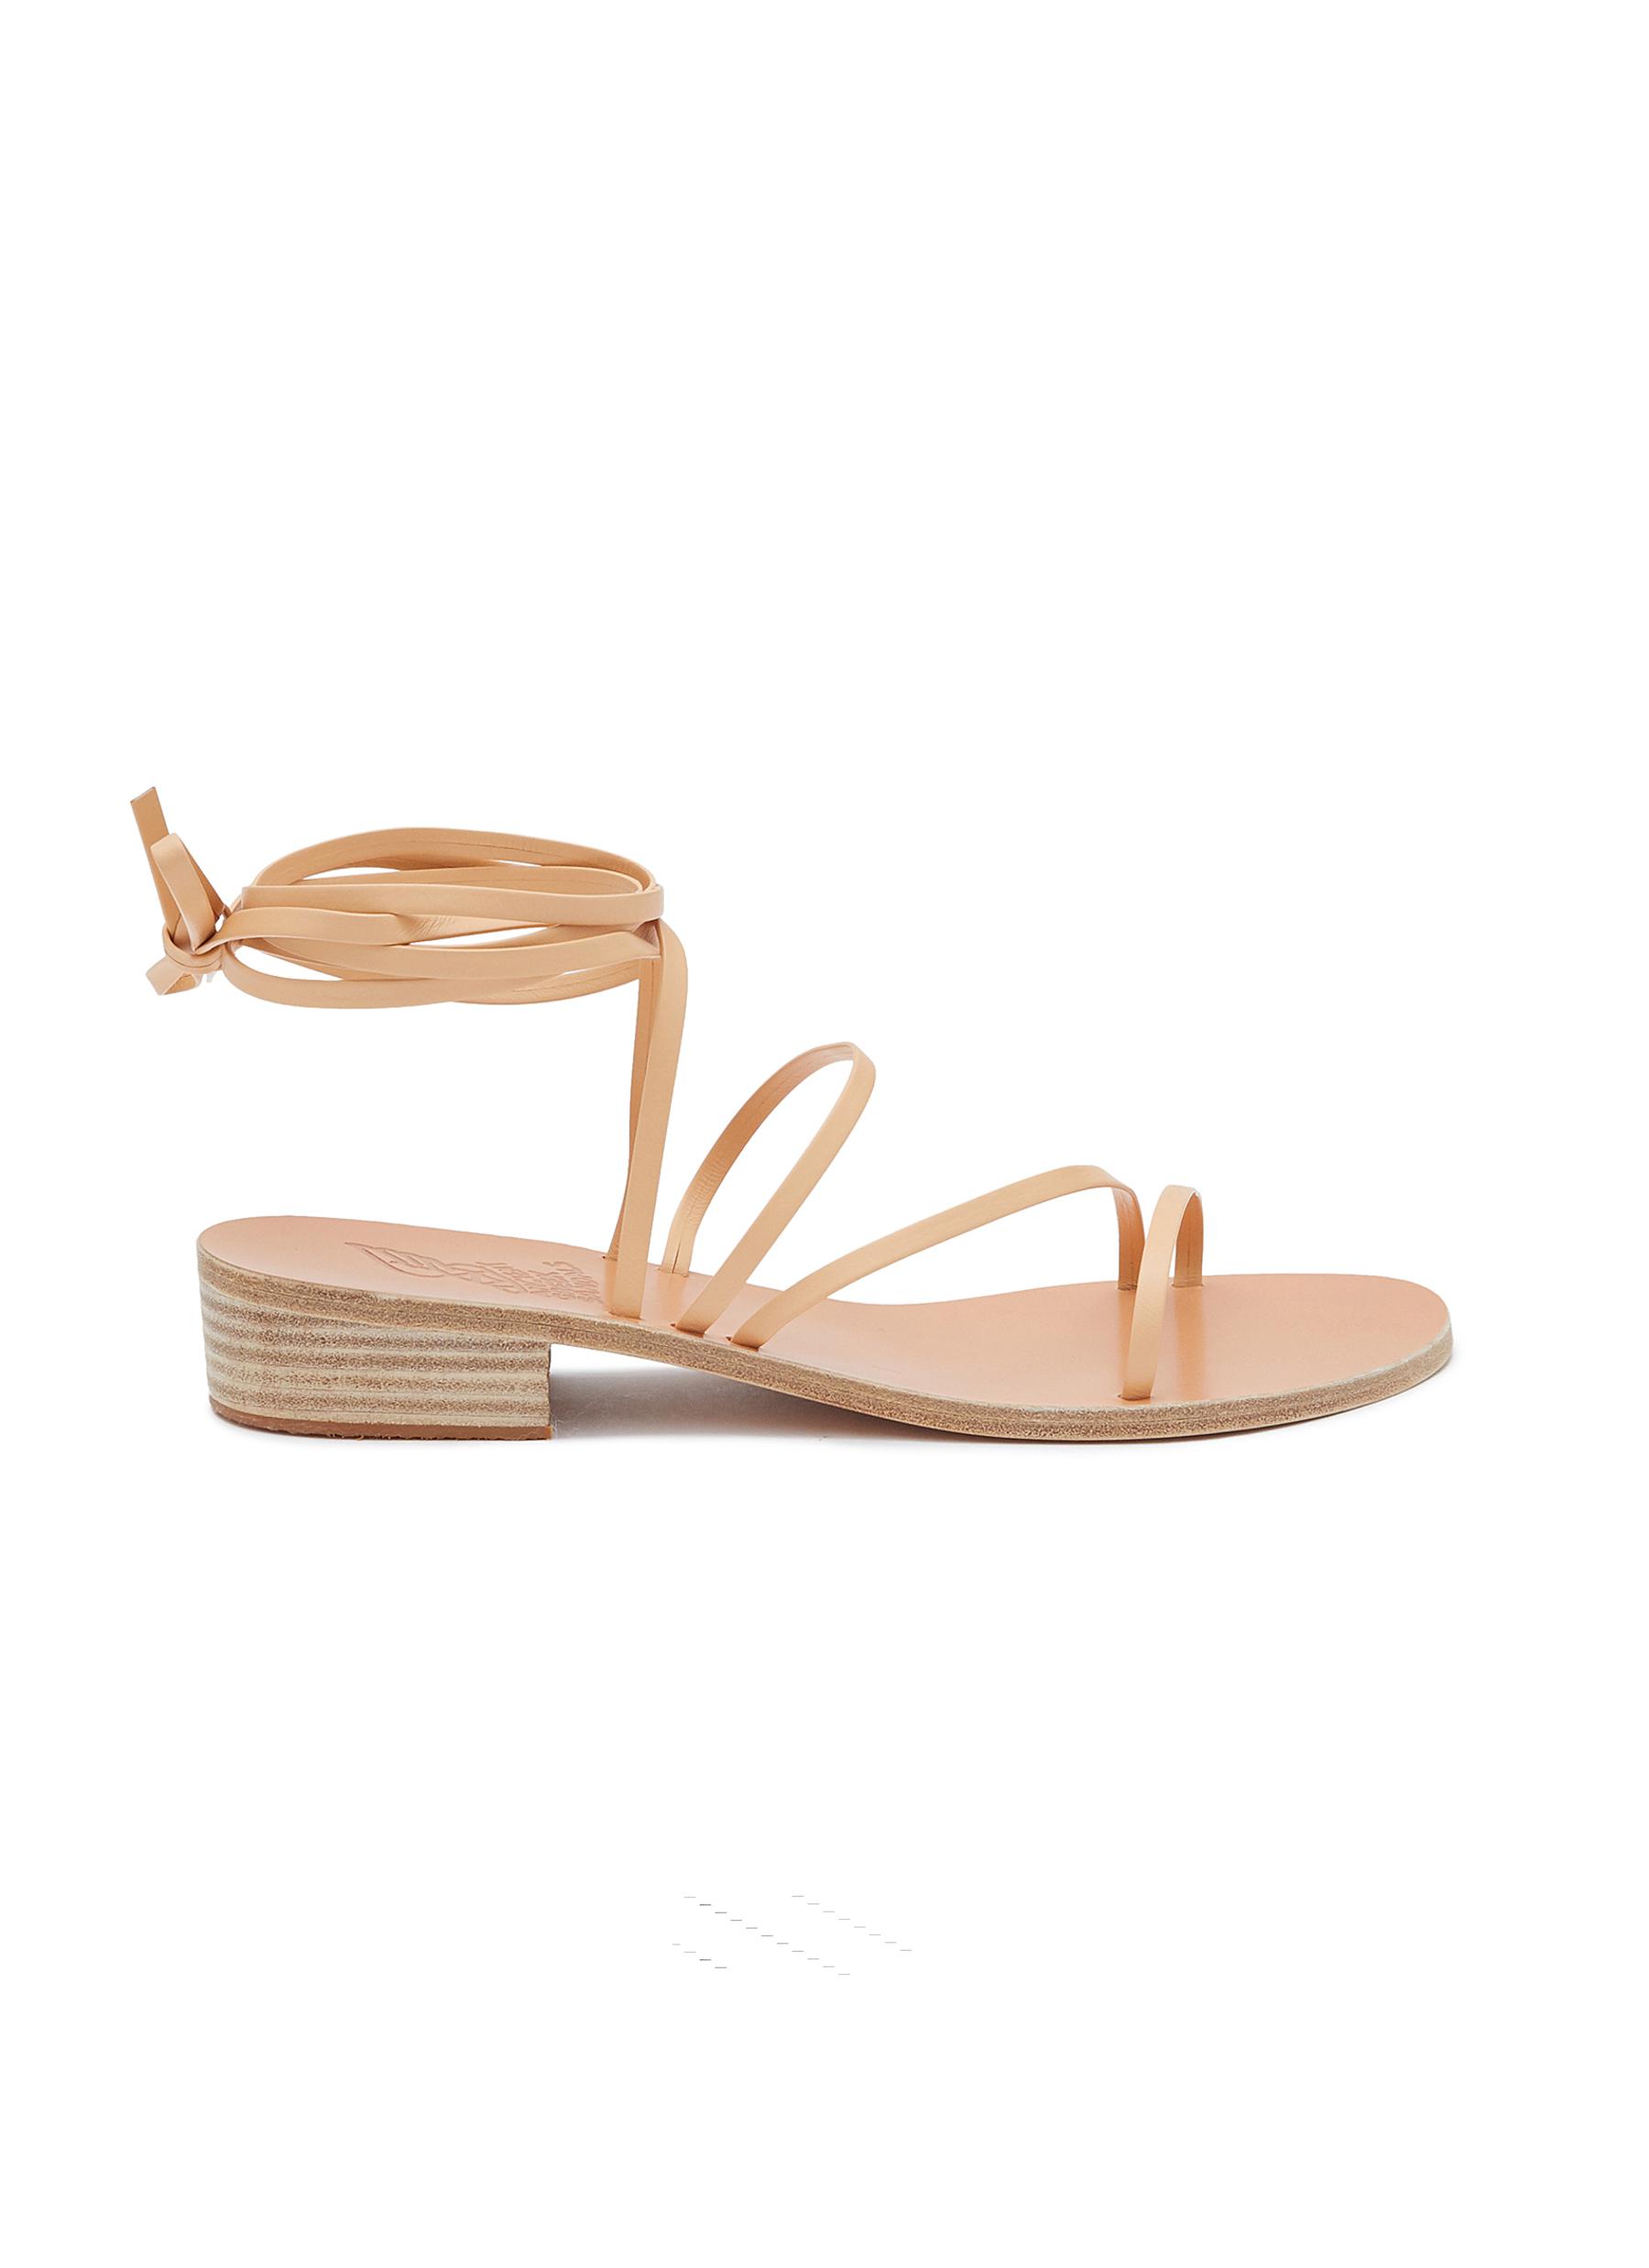 ‘Hara' Ankle Wrap Leather Sandals